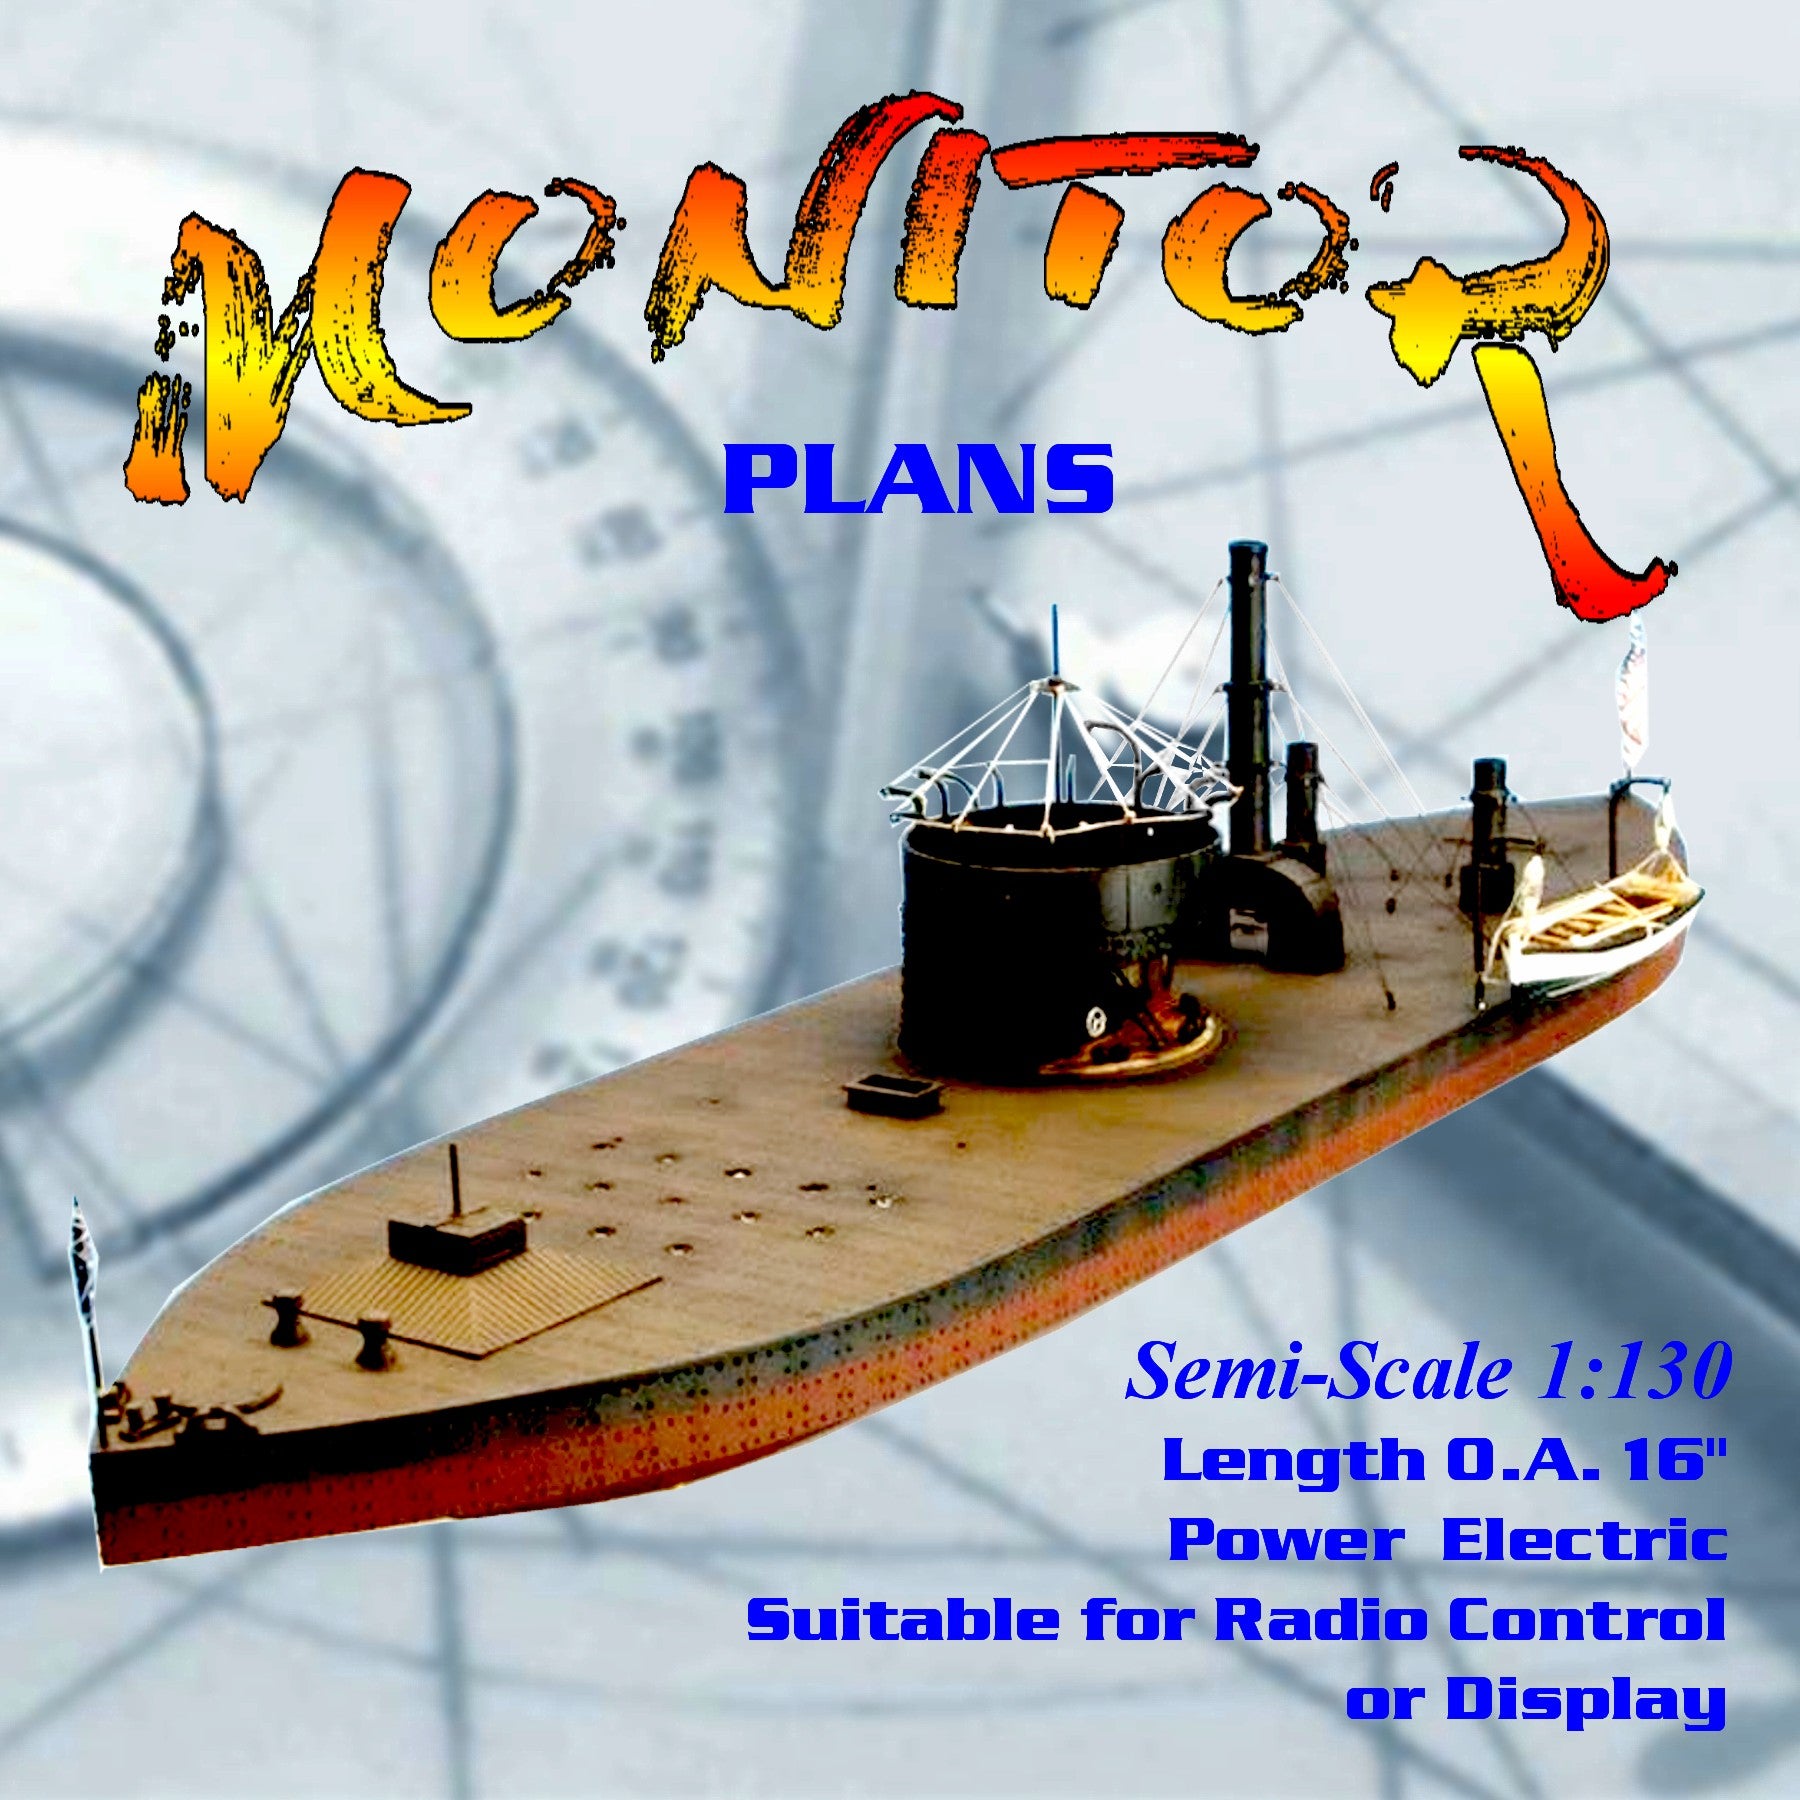 full size printed plan semi-scale 1:130 monitor suitable for small radio control